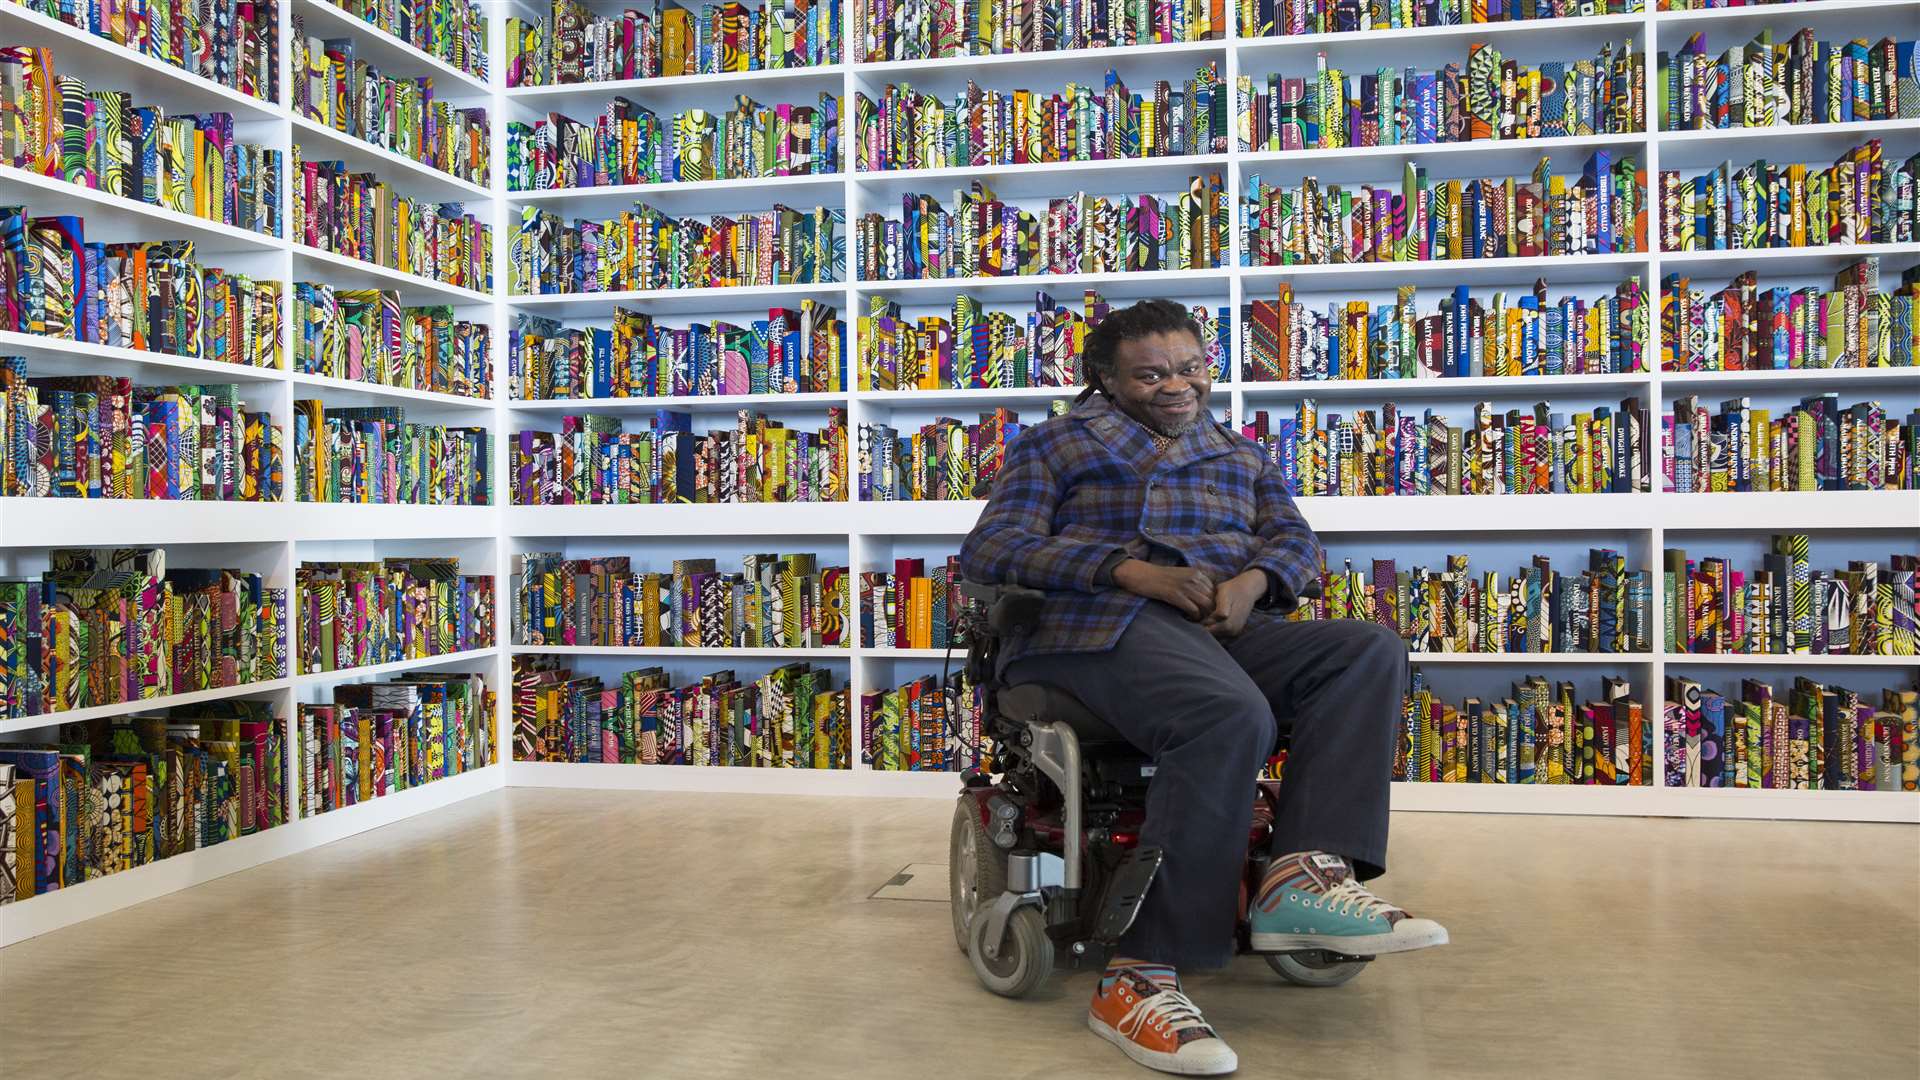 Yinka Shonibare MBE in front of his work The British Library, 2014 on show at Turner Contemporary until October 30, 2016. Photo: John Phillips/Getty Images for 14-18 NOW